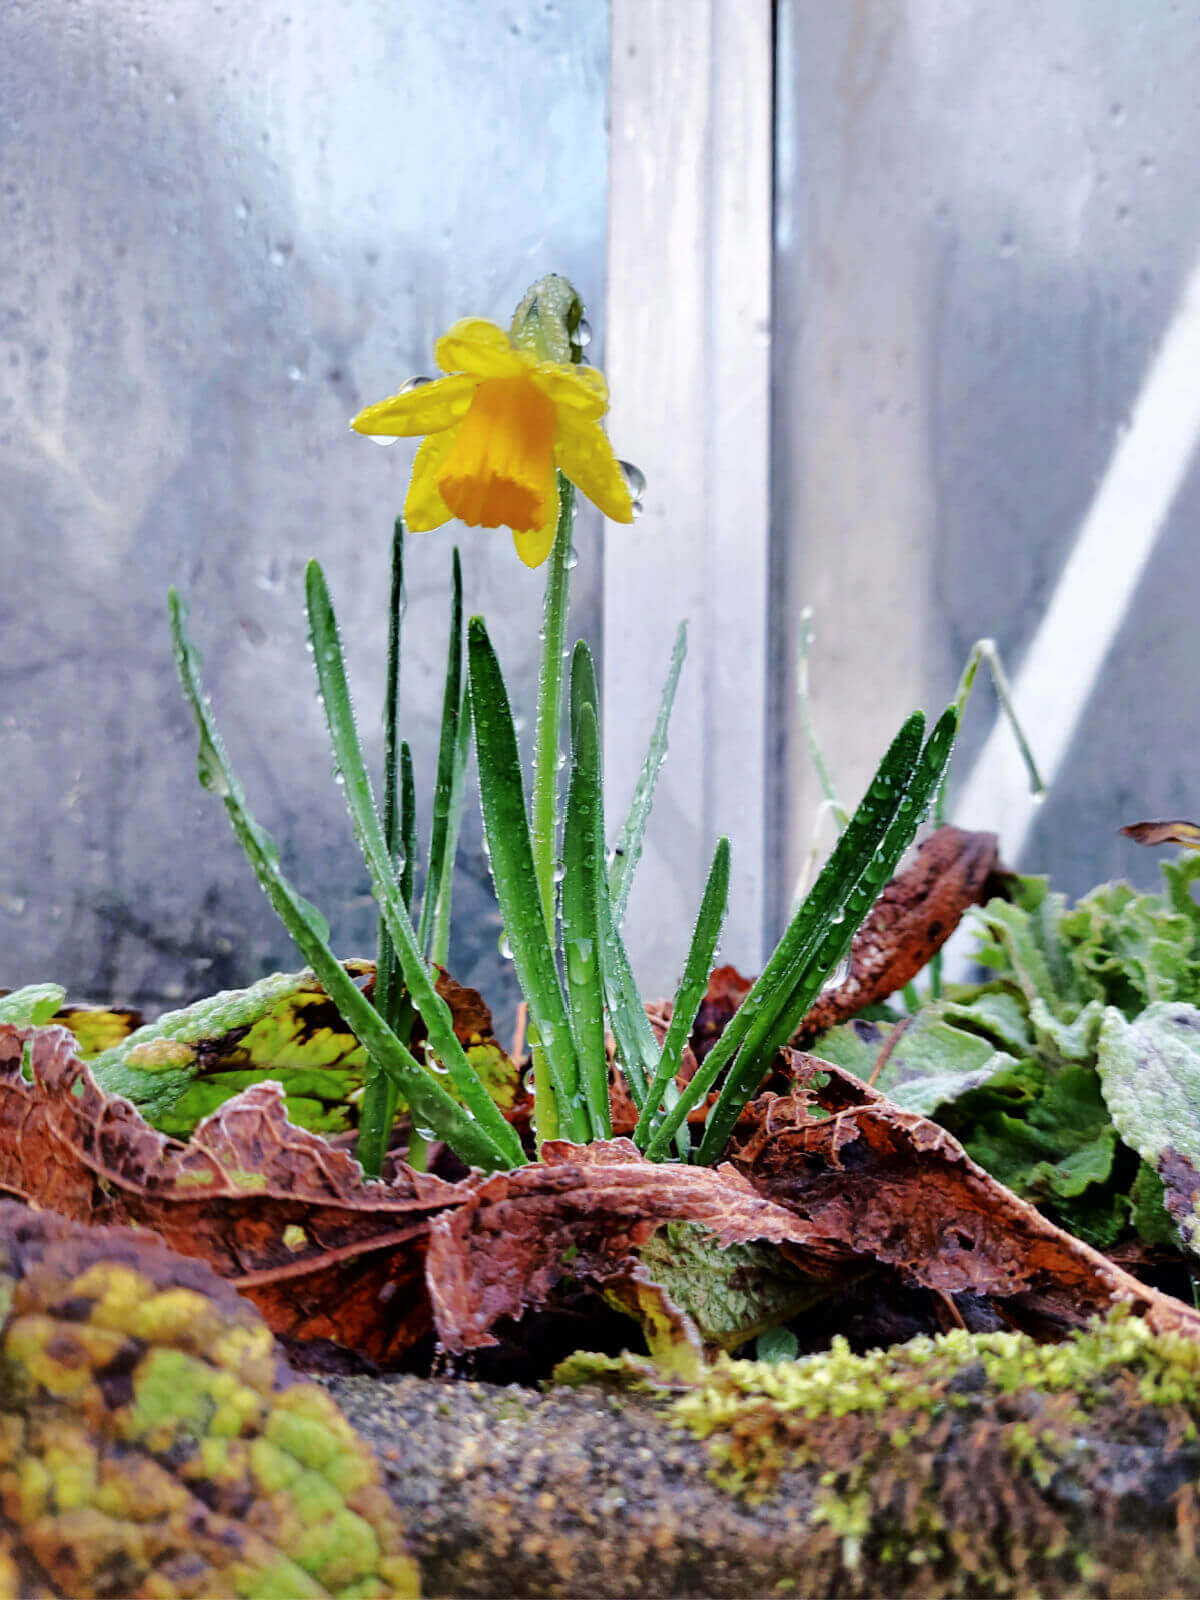 A single miniature daffodil with frosty droplet leaves in a planter outside a greenhouse